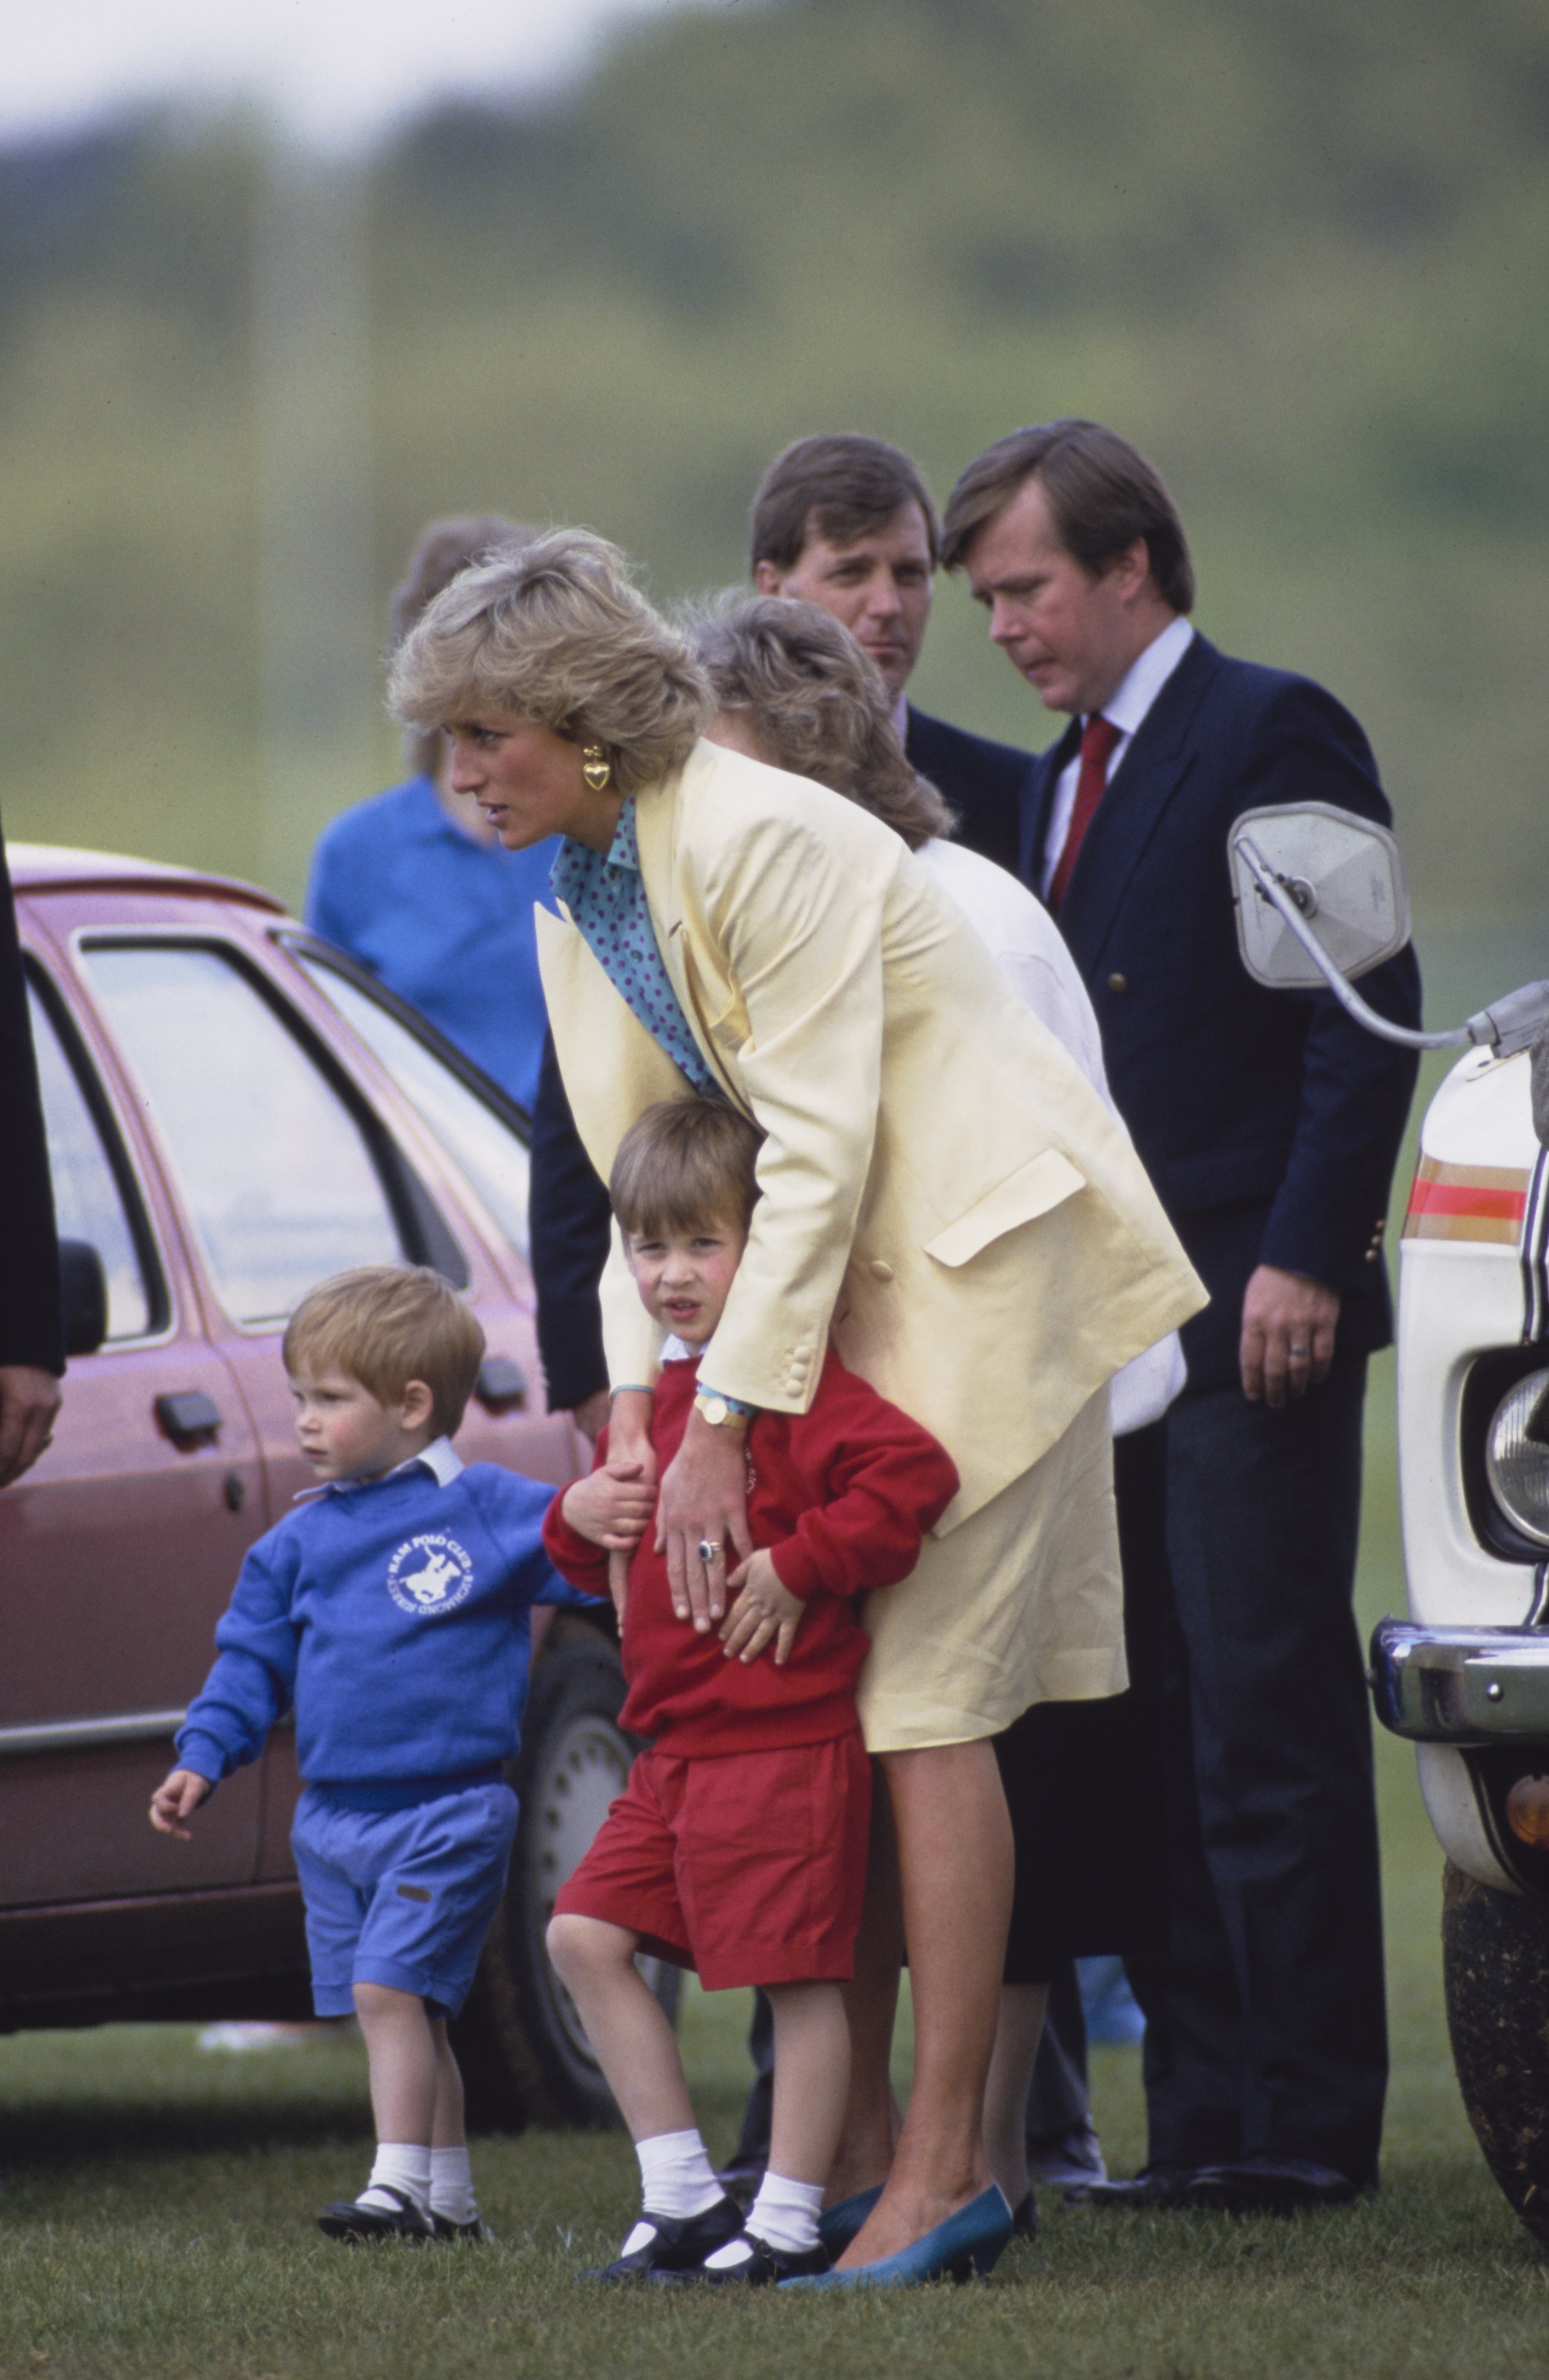 Princess Diana and her sons Prince Harry and Prince William at the Guards Polo Club in Windsor, Berkshire, England, on May 31, 1987 | Source: Getty Images